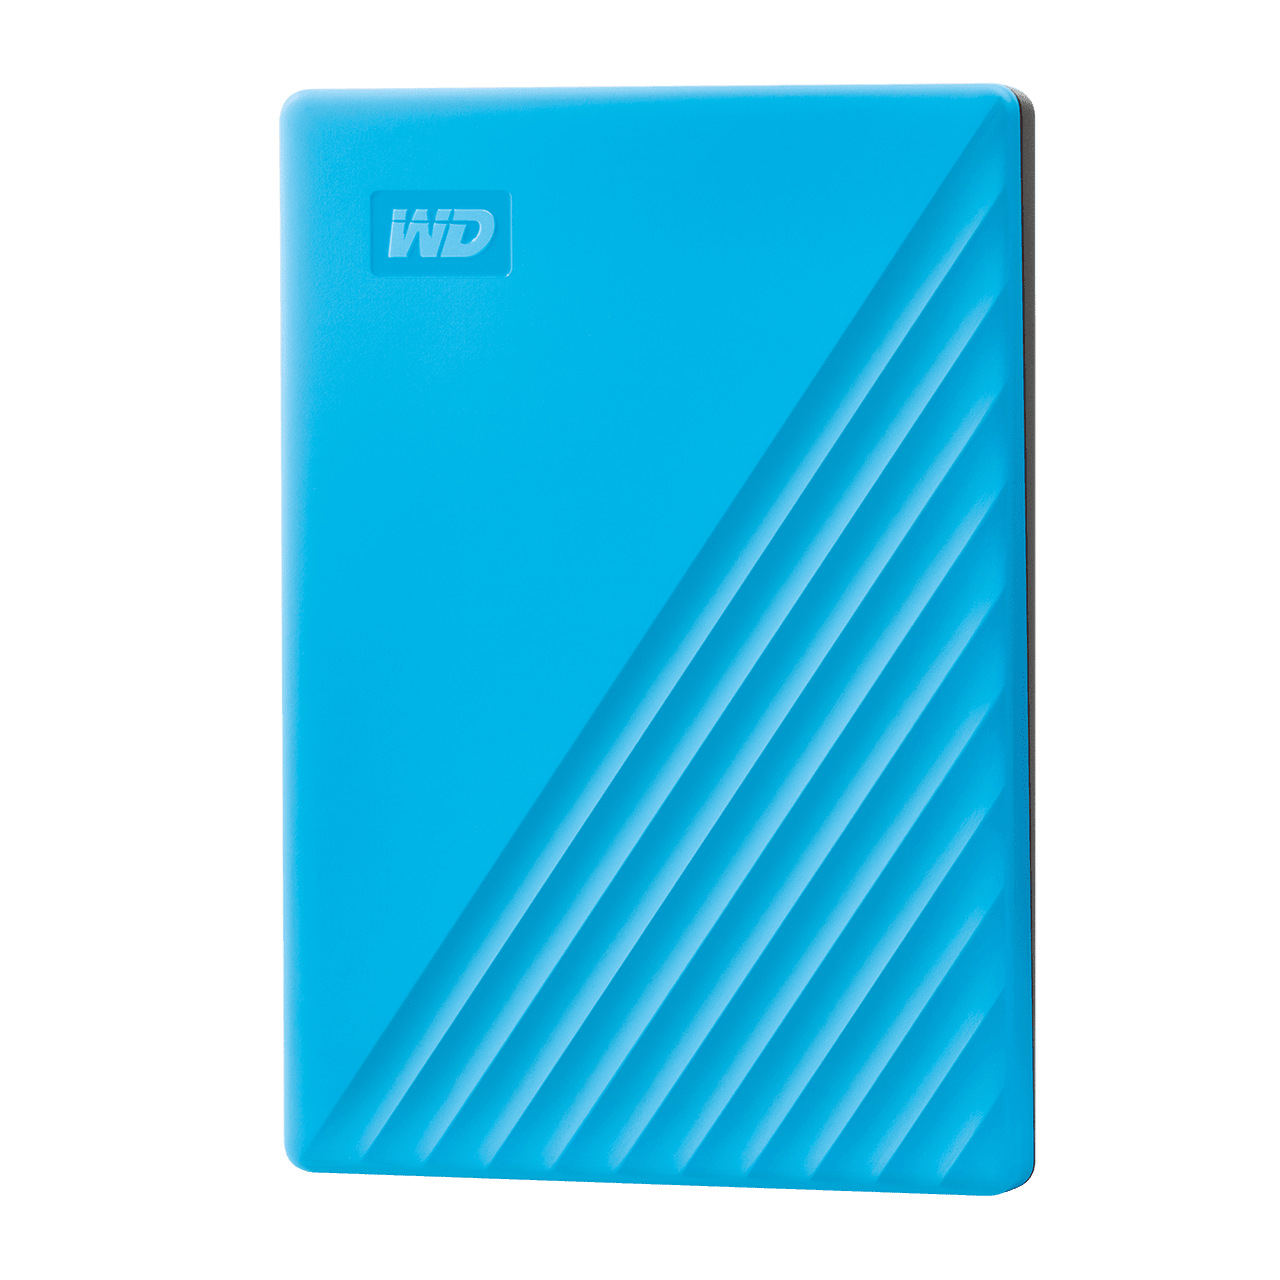 WD Western Digital My Passport 2TB (Blue) Slim Portable External Hard Disk USB 3.0 With WD Backup Software & Password Protection